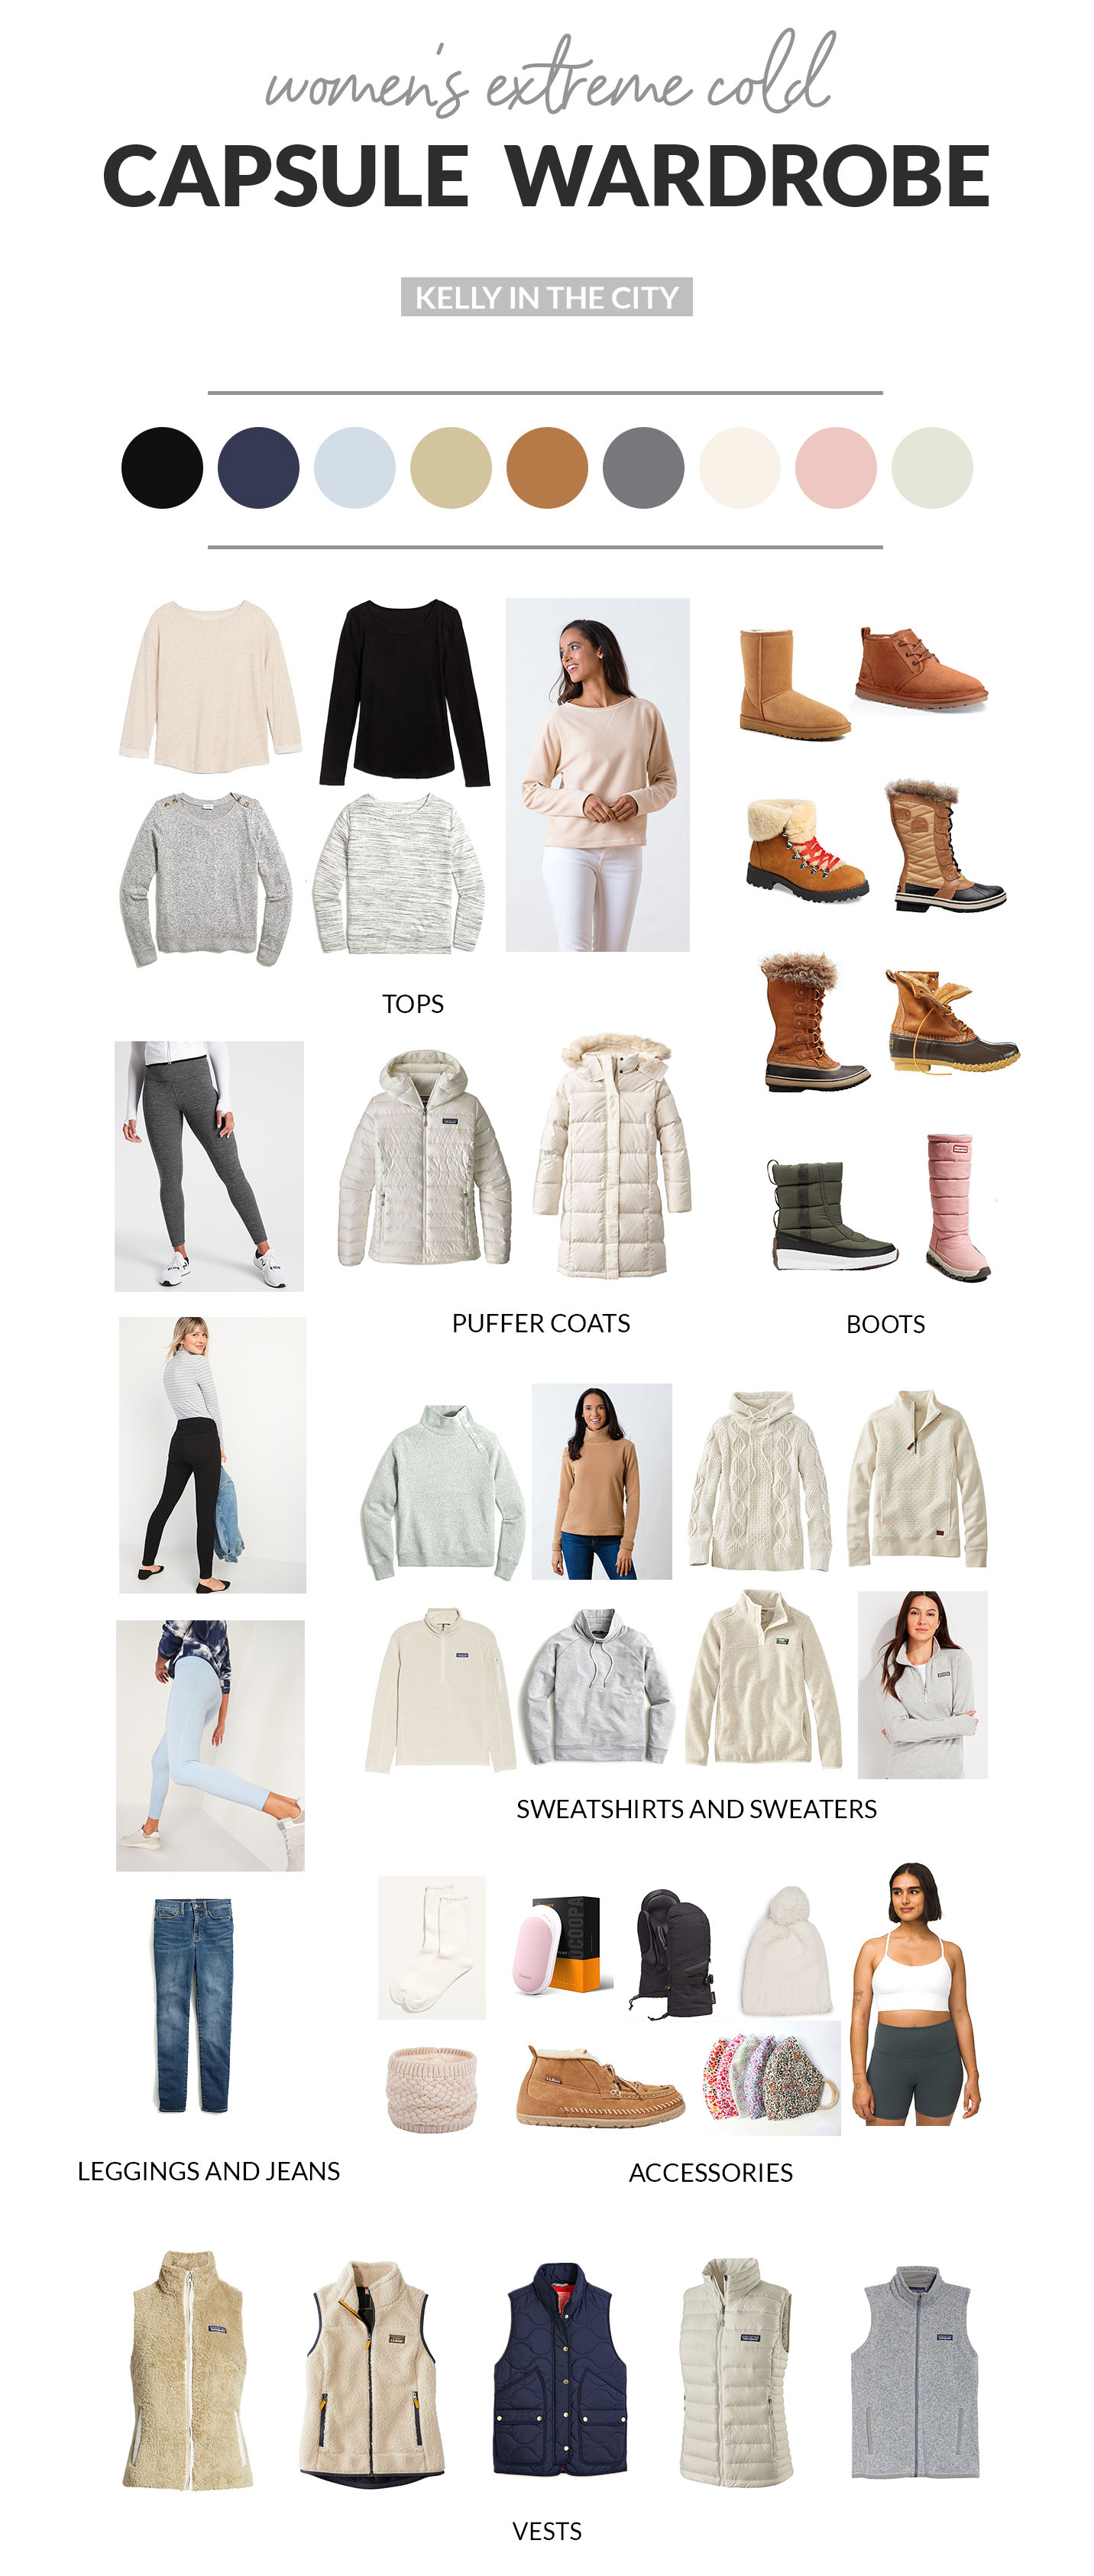 How to Build a Womens Extreme Cold Capsule Wardrobe